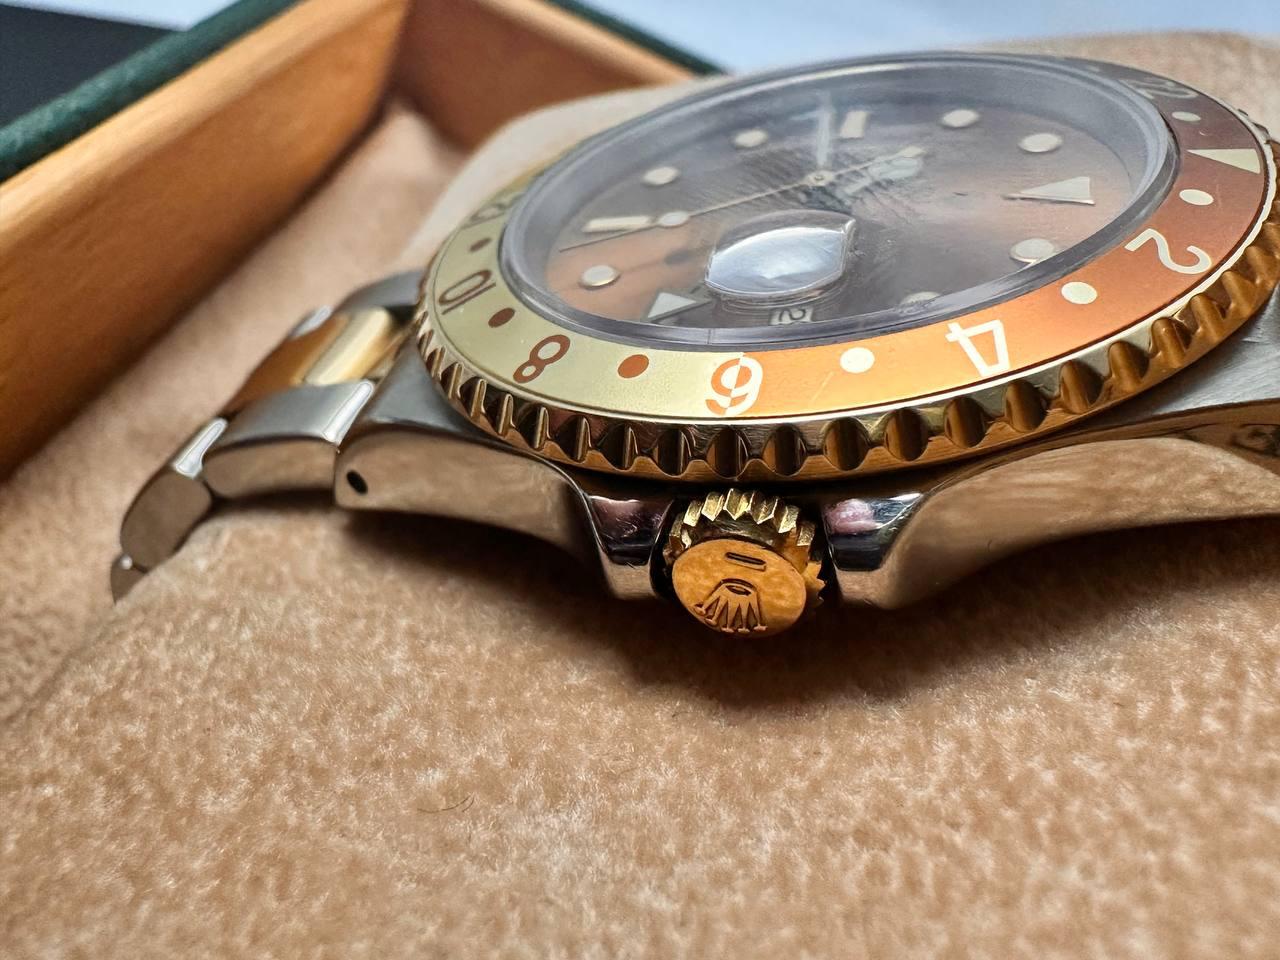 Rolex Gmt Master II reference 16713 